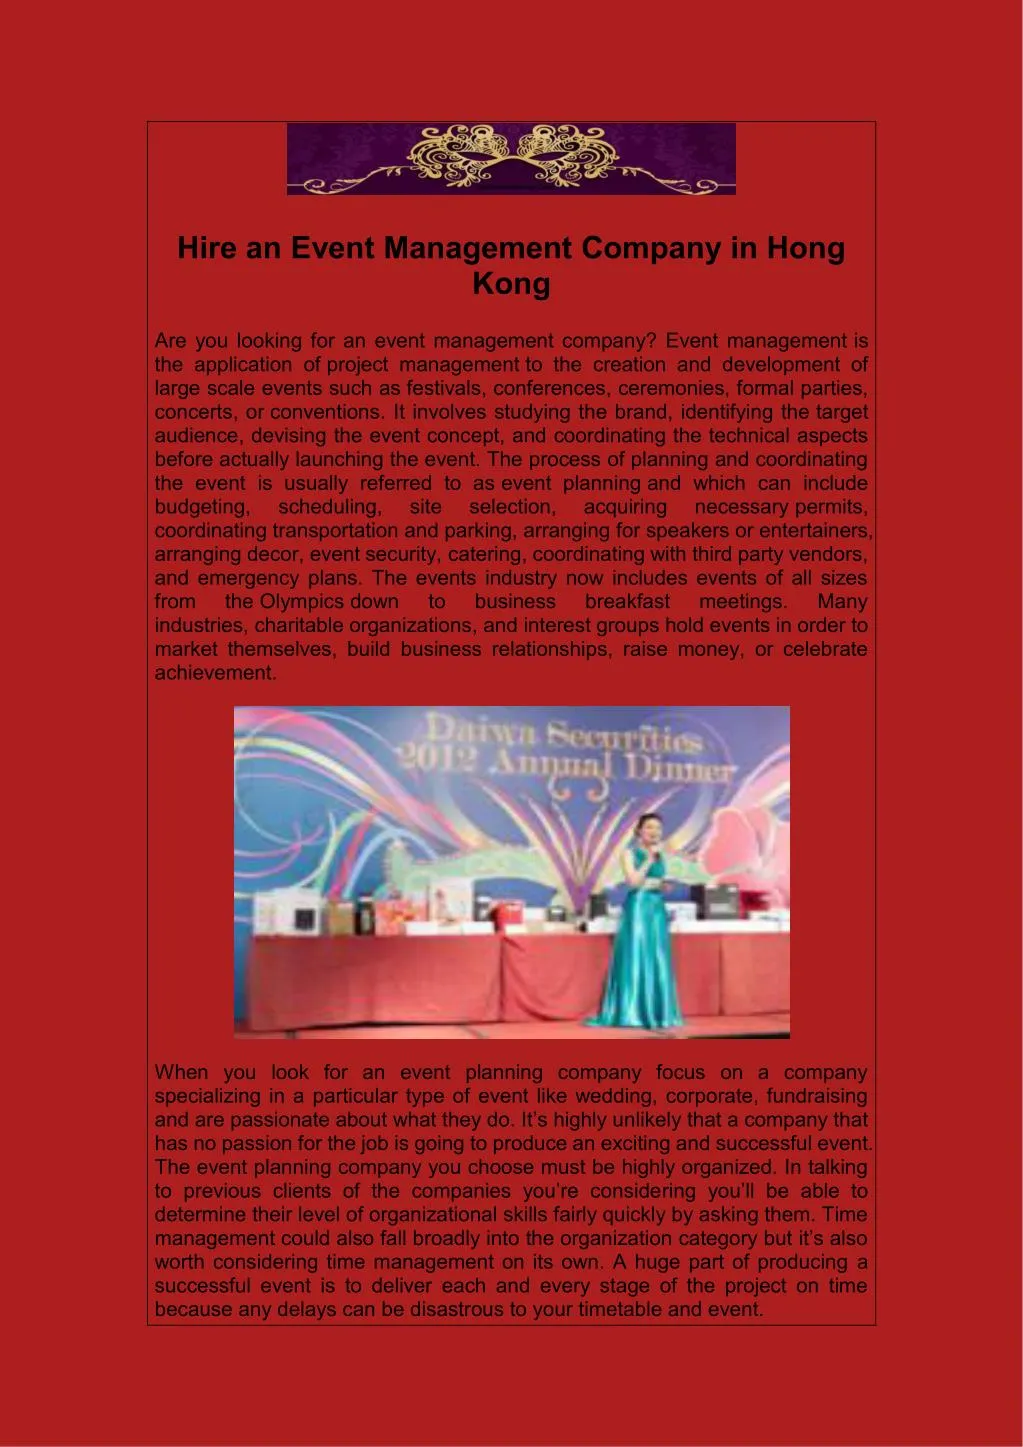 hire an event management company in hong kong